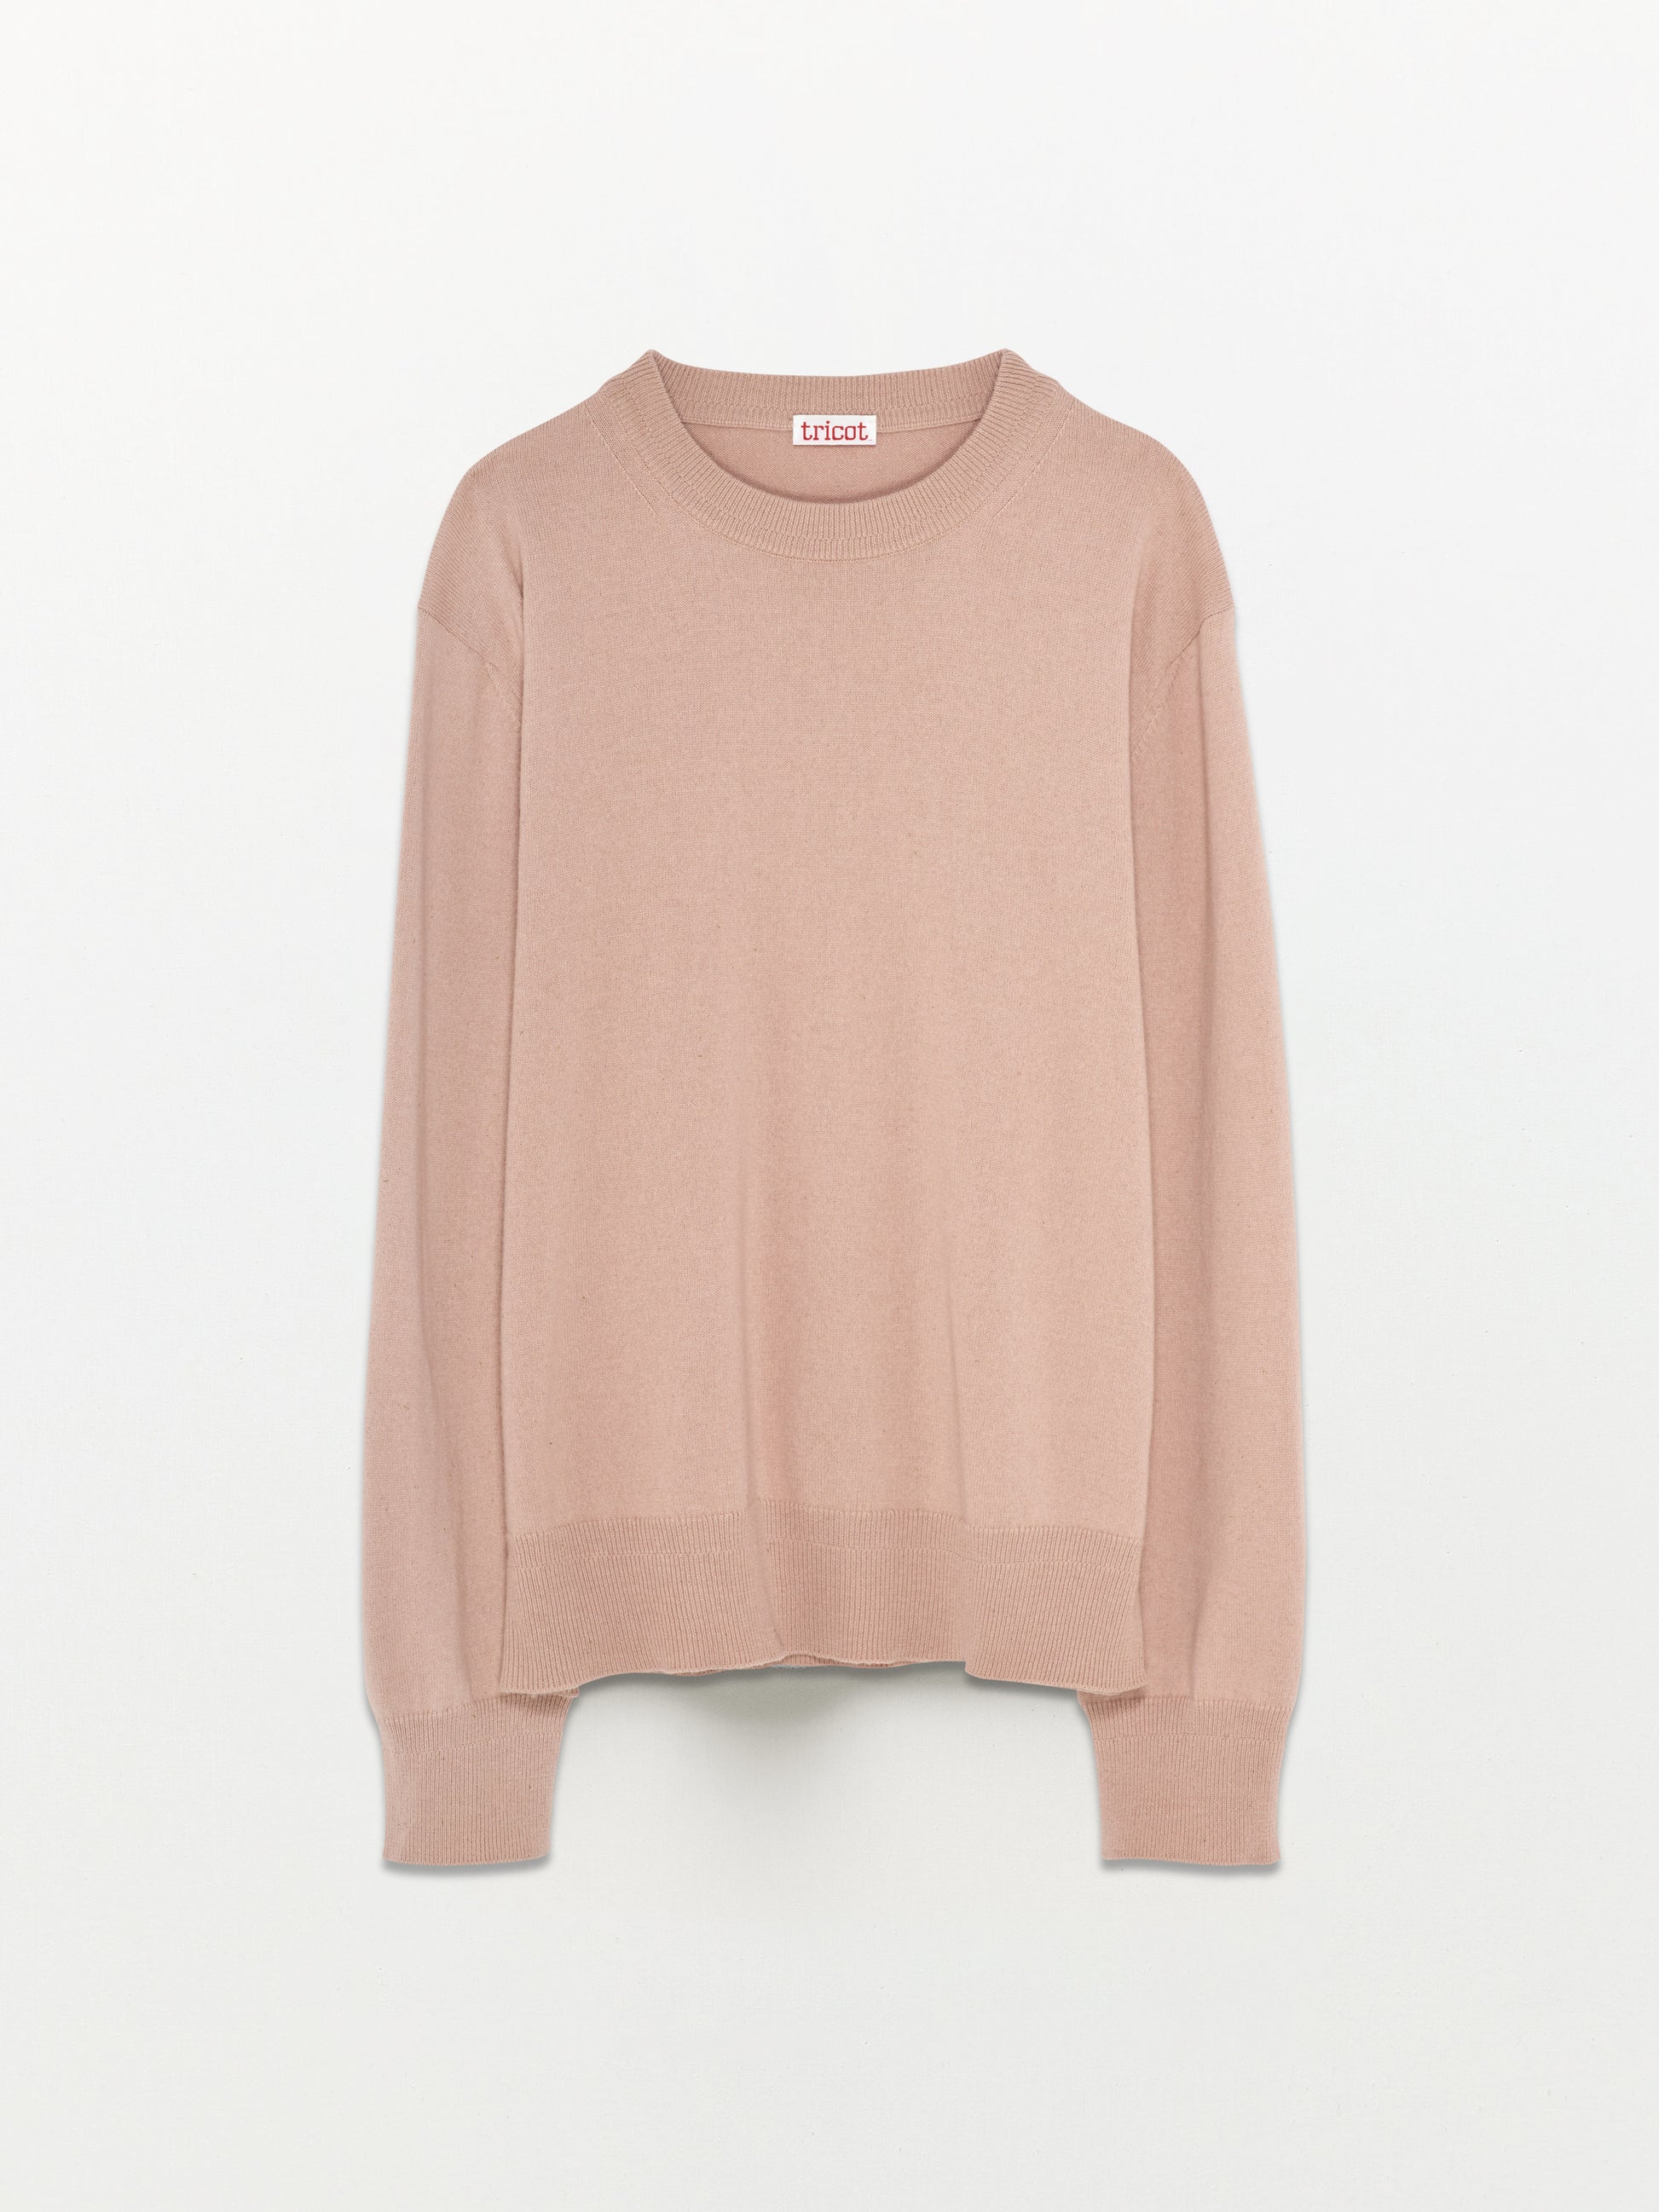 Men’s Pink Recycled Cashmere & Cotton Sweater